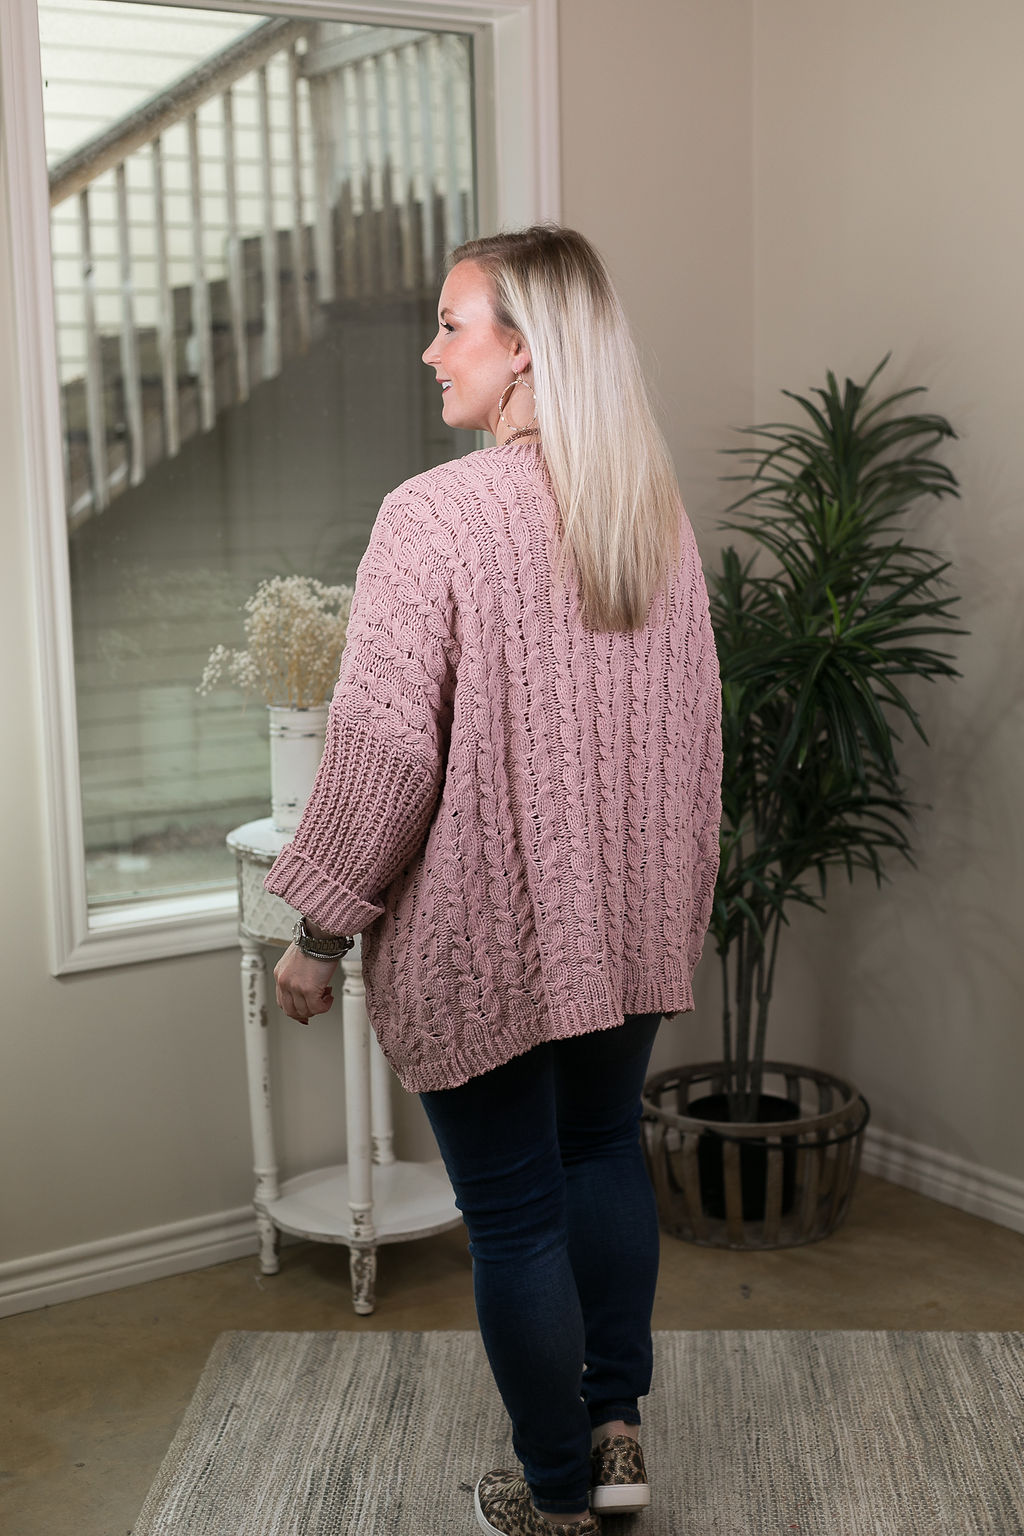 On My Level Chenille Cable Knit Pullover Sweater in Mauve Pink - Giddy Up Glamour Boutique